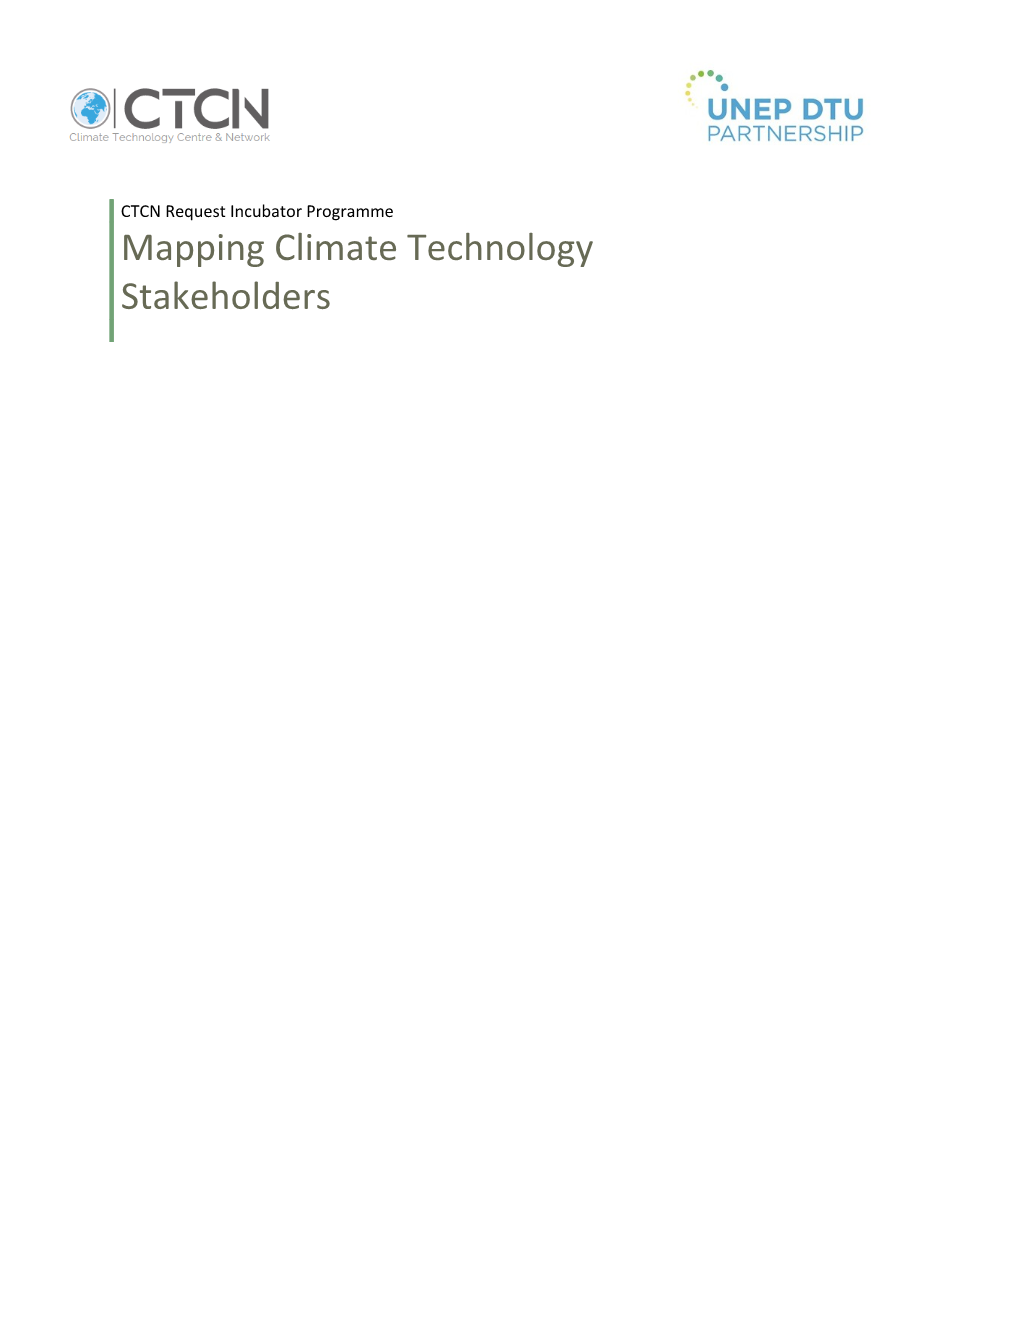 Mapping Climate Technology Stakeholders